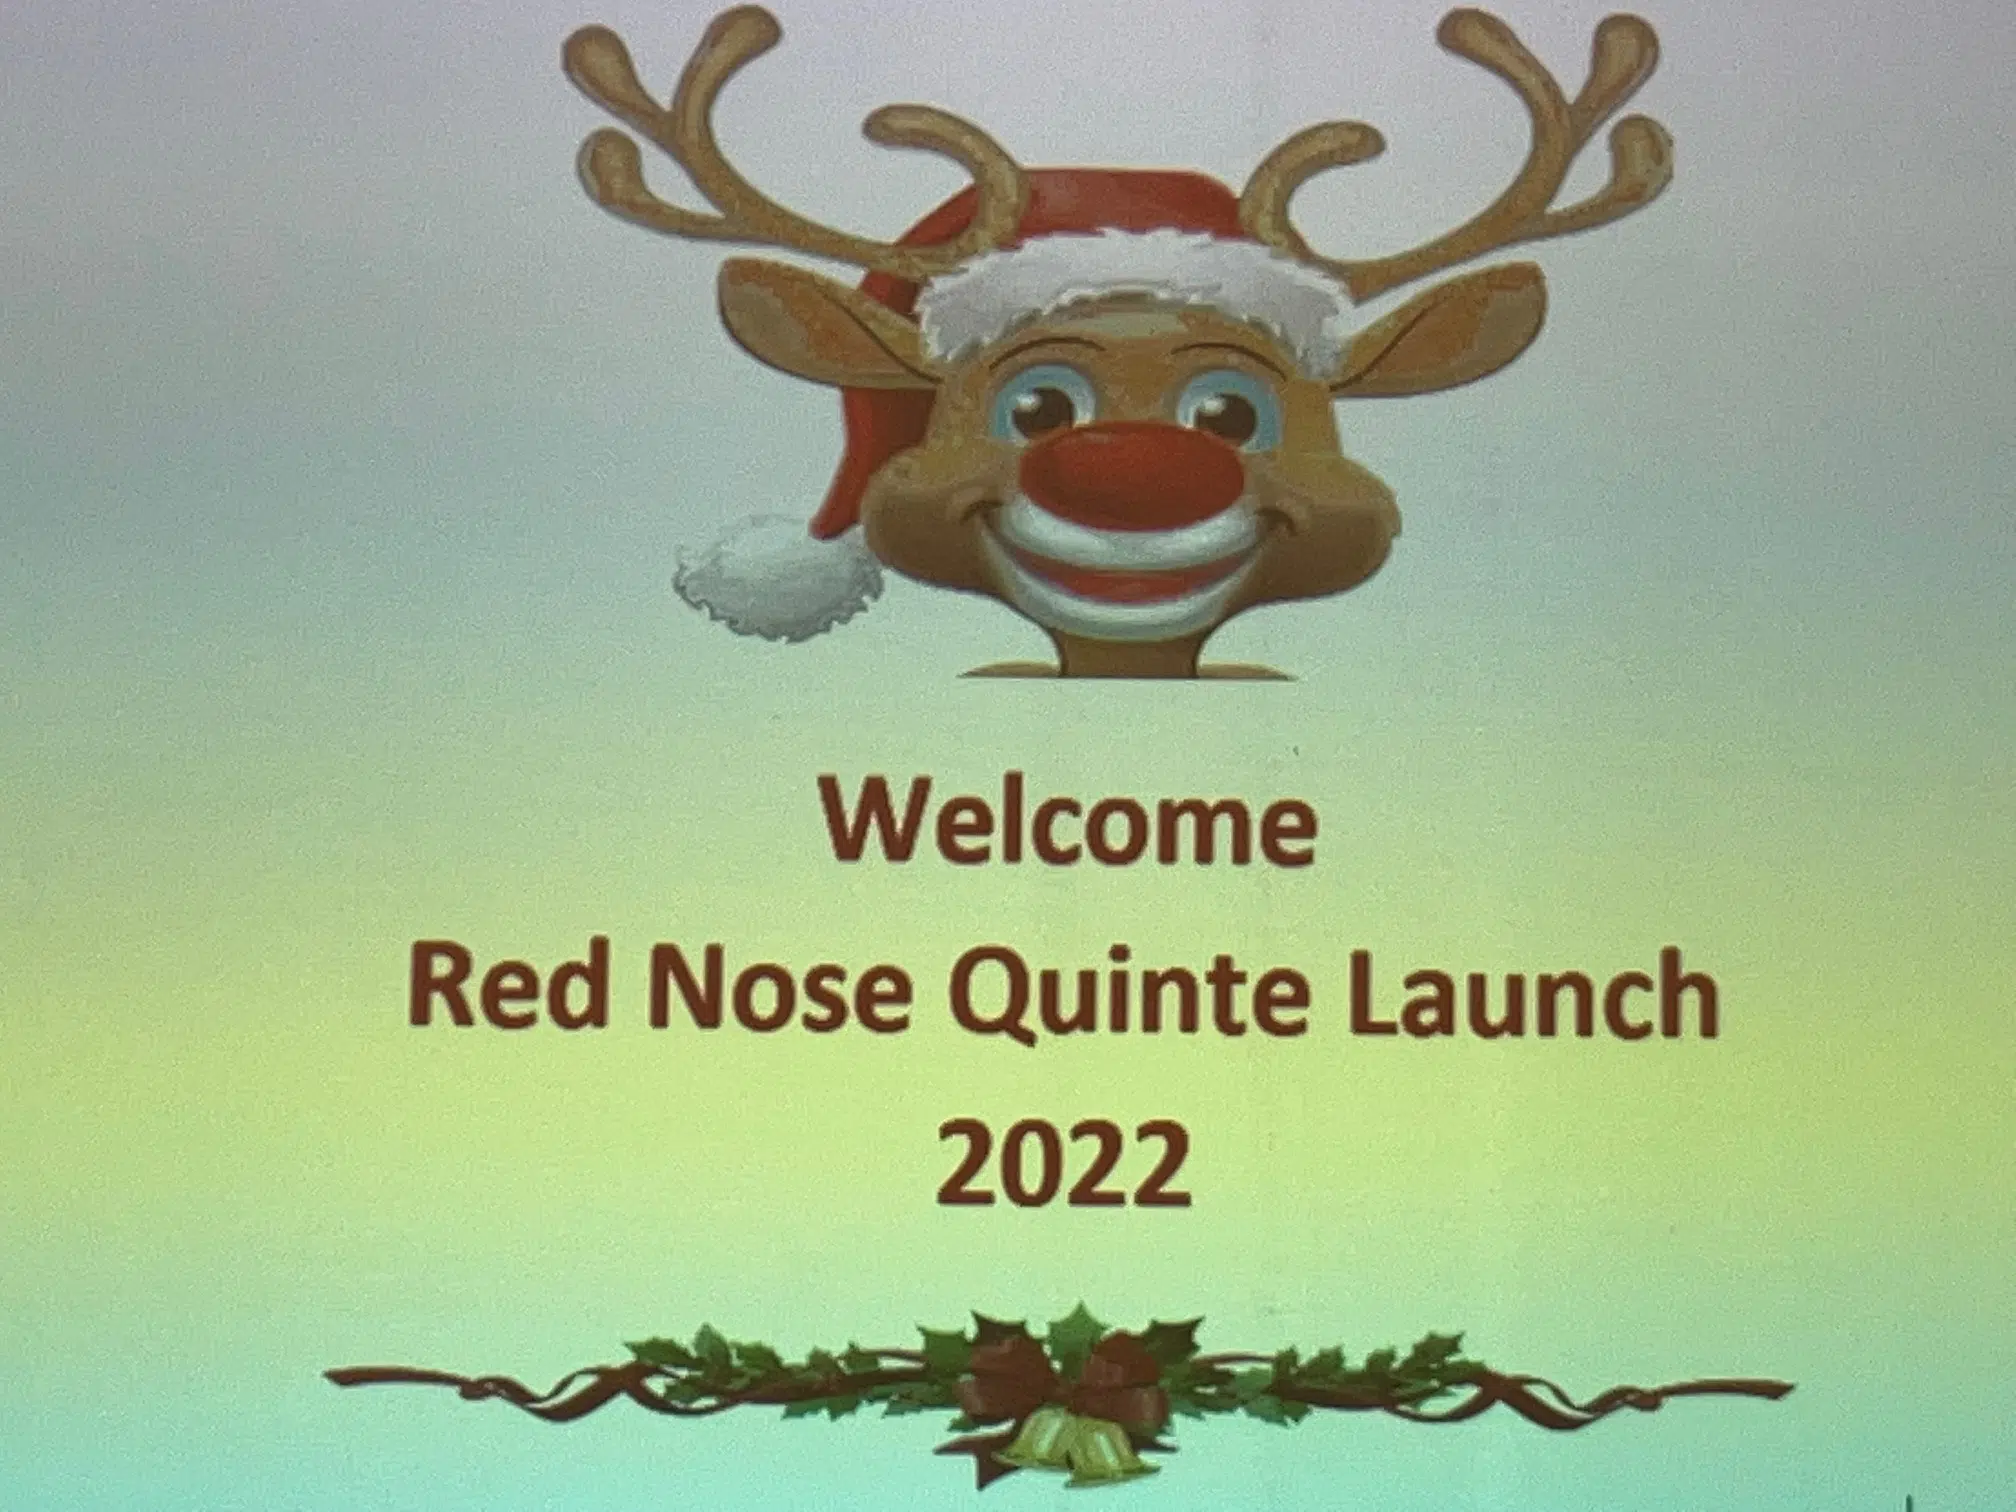 Red Nose Quinte back behind the wheel